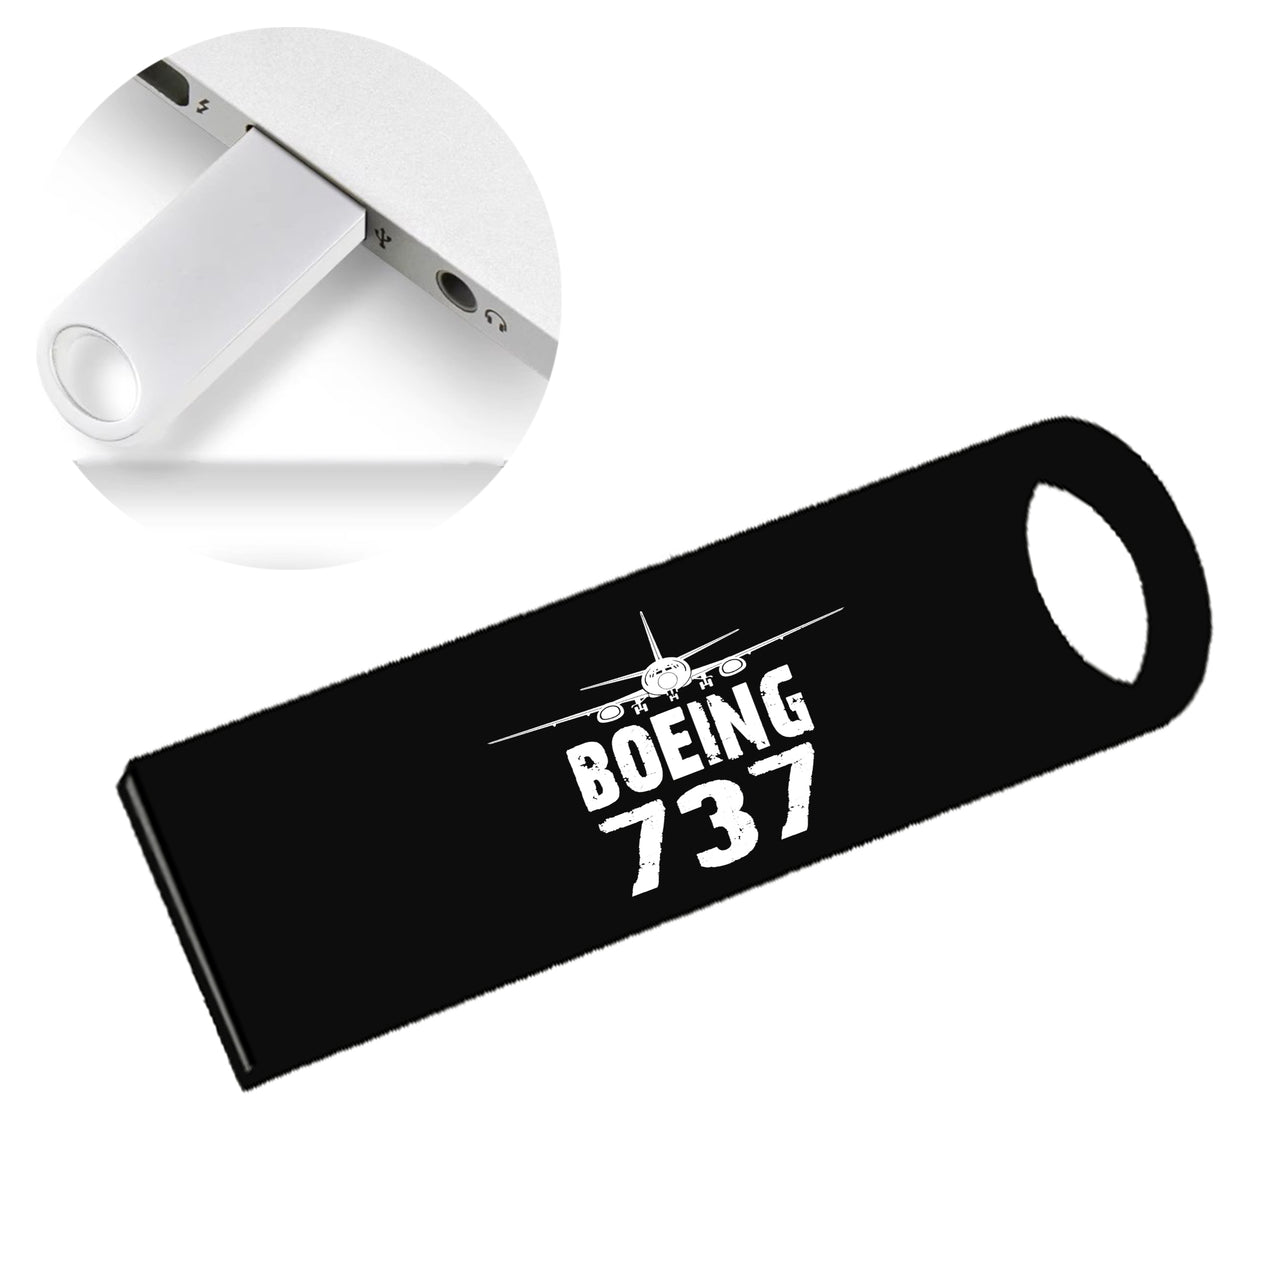 Boeing 737 & Plane Designed Waterproof USB Devices